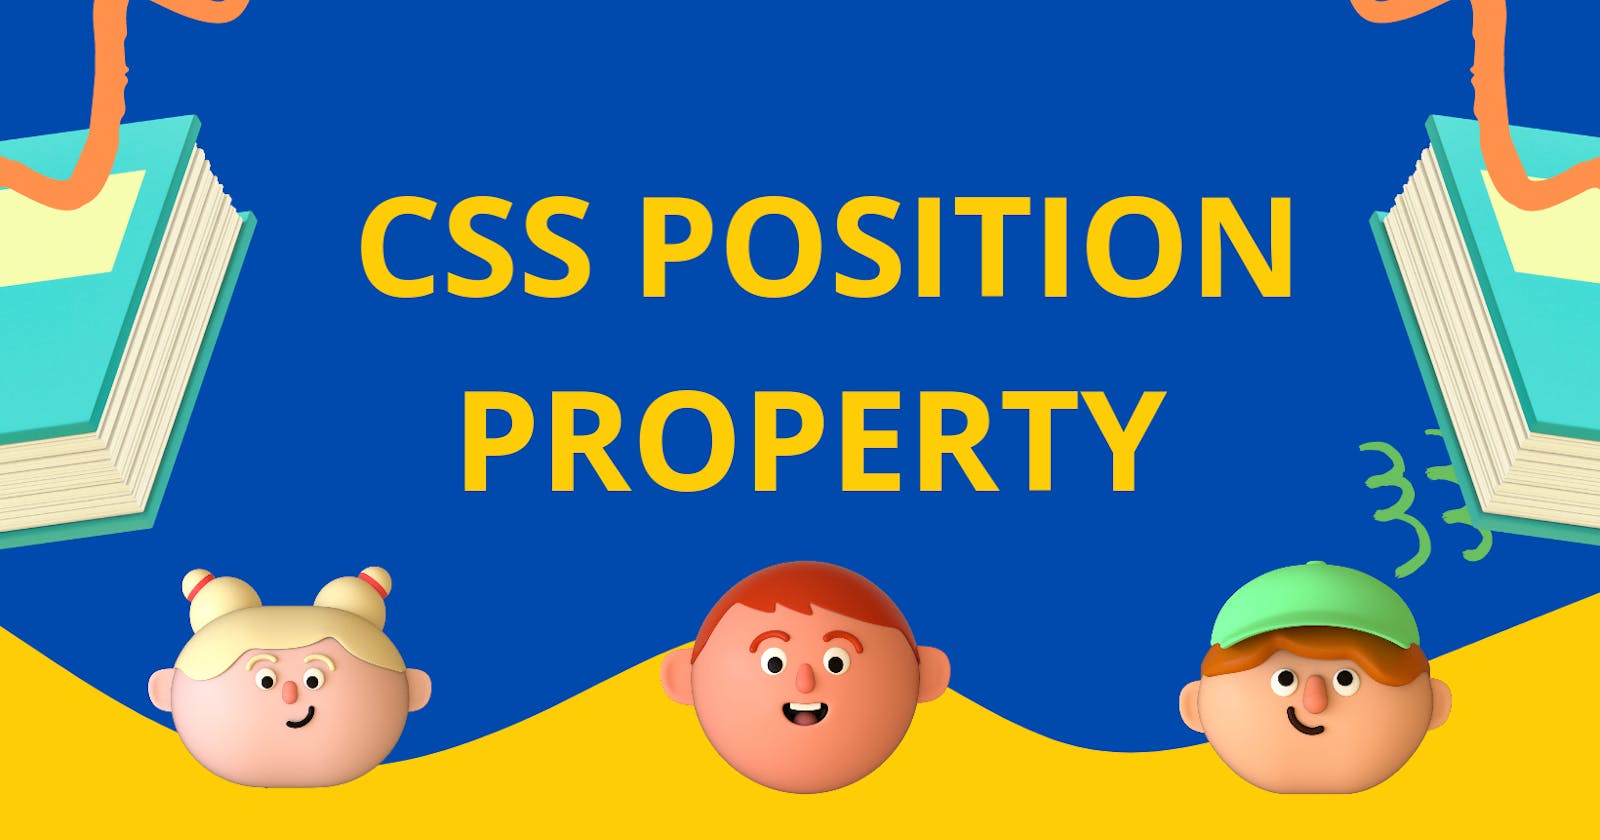 Css Position Property